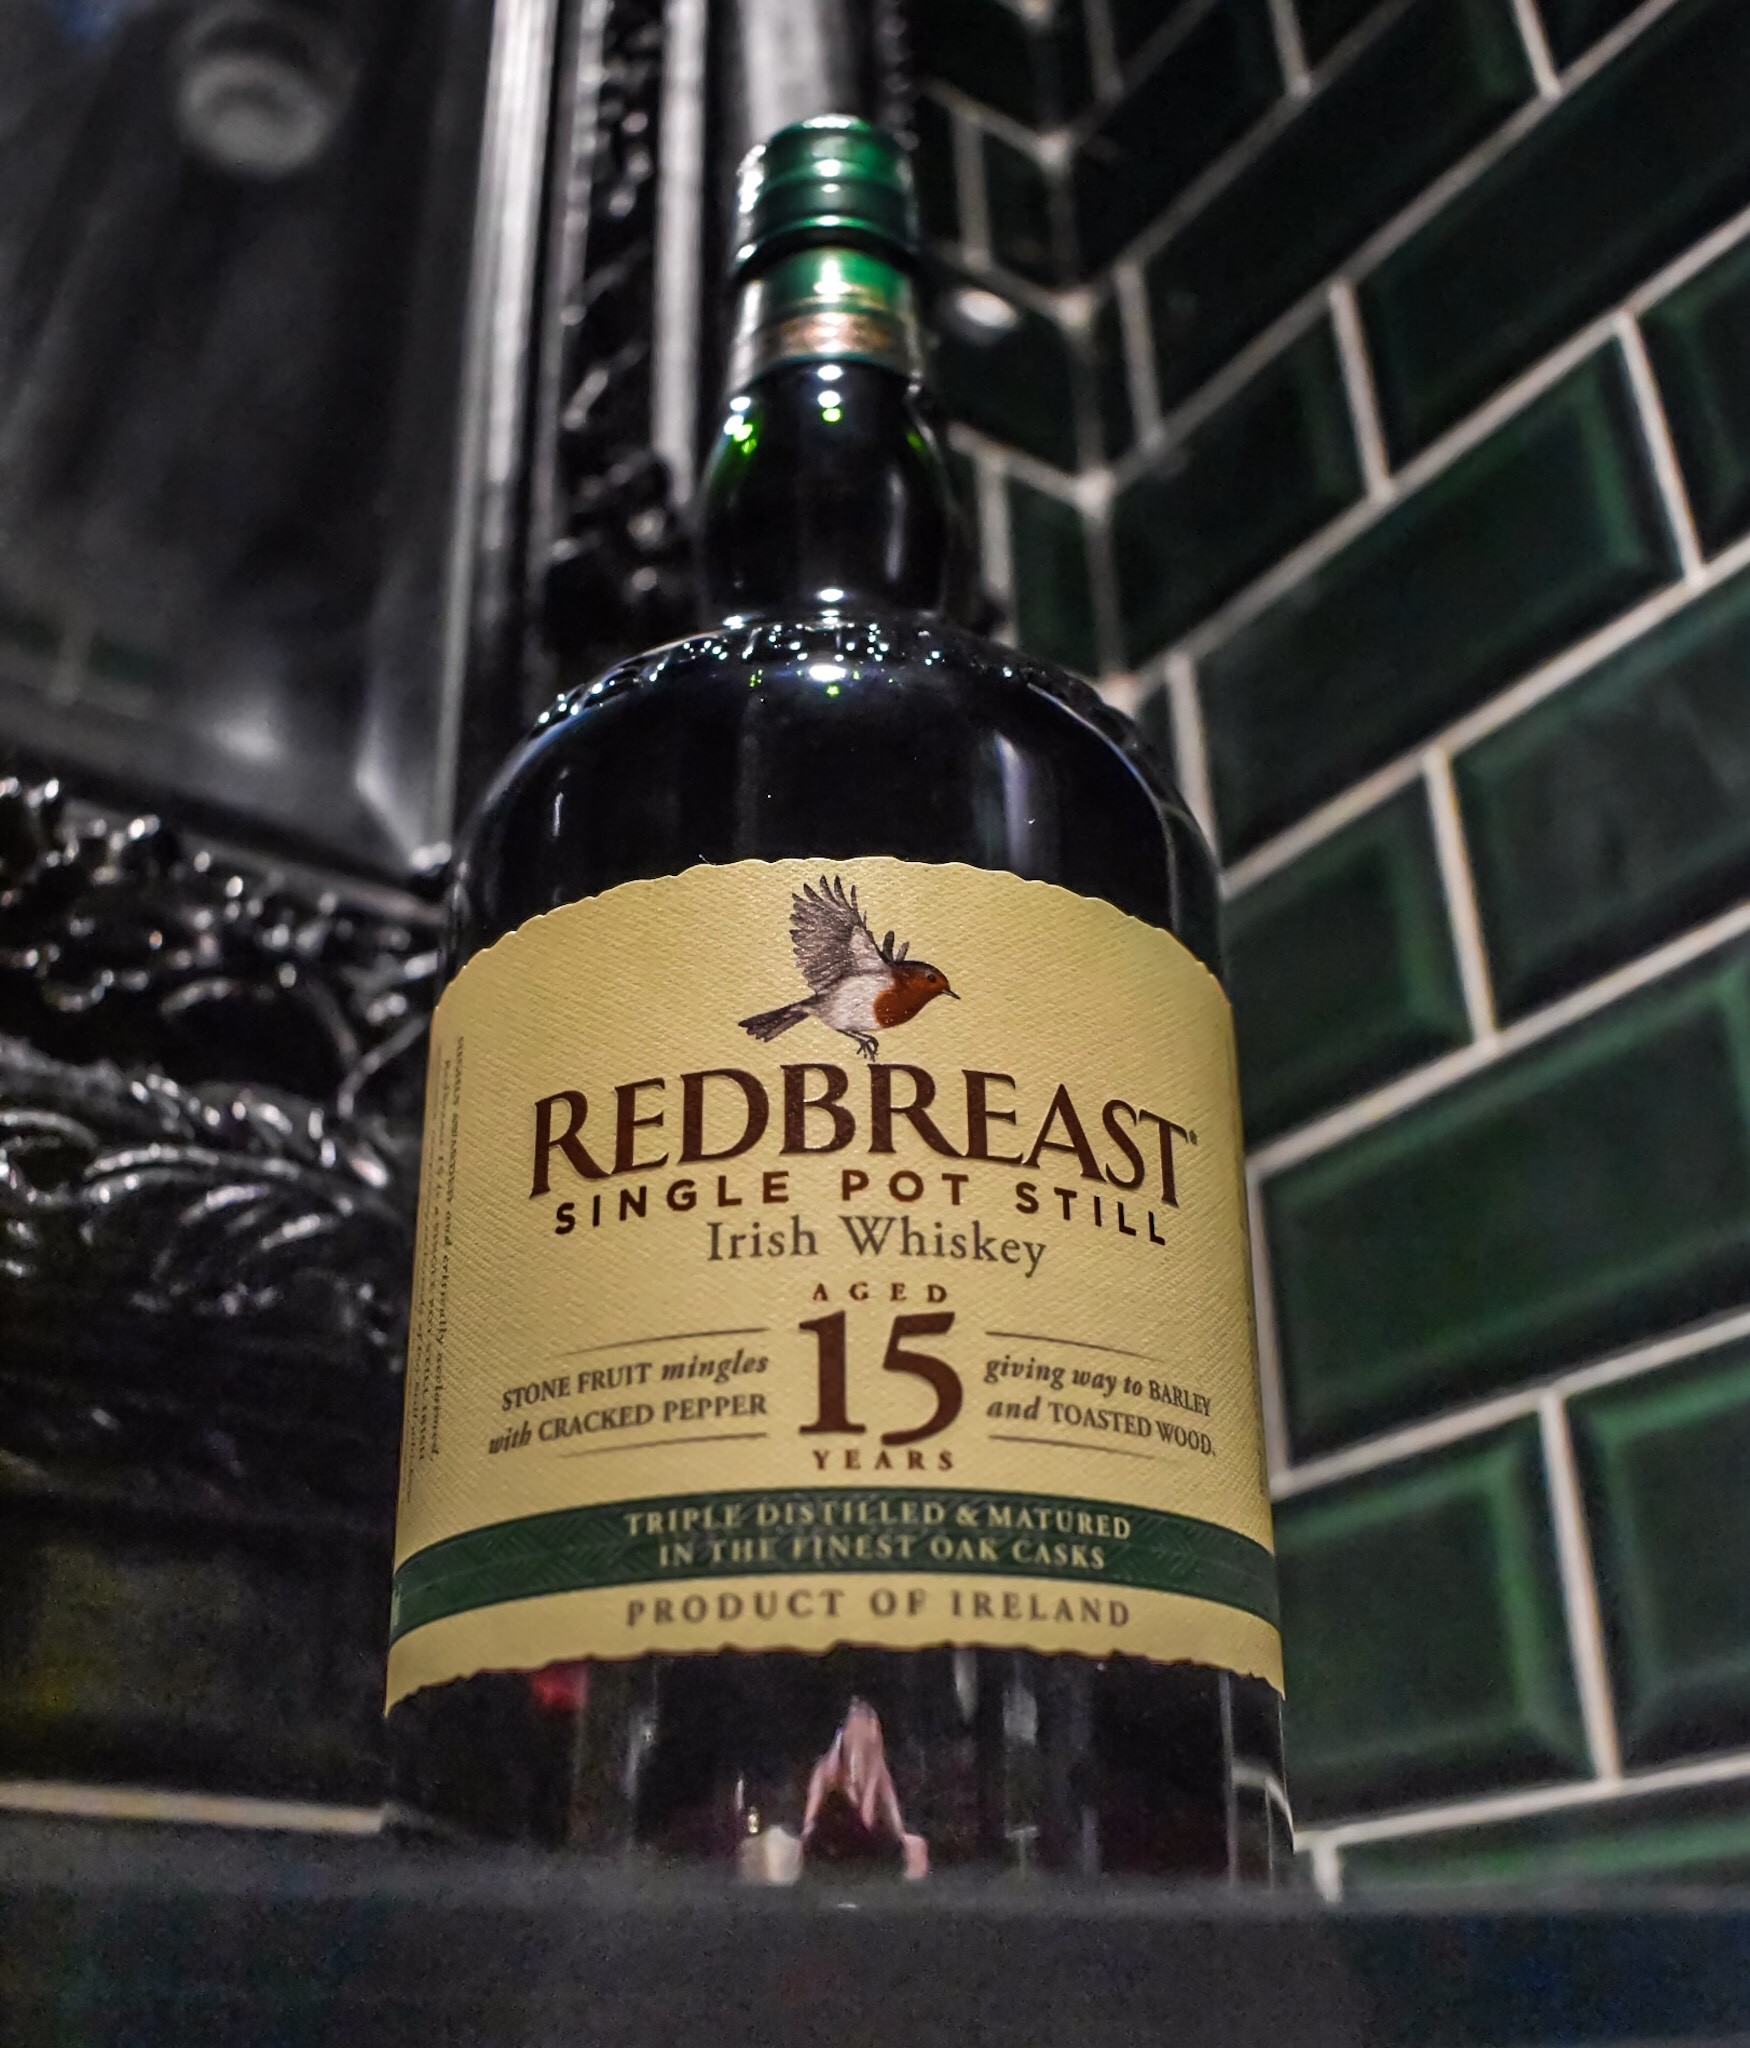 Sunday Tipple with Redbreast featured image